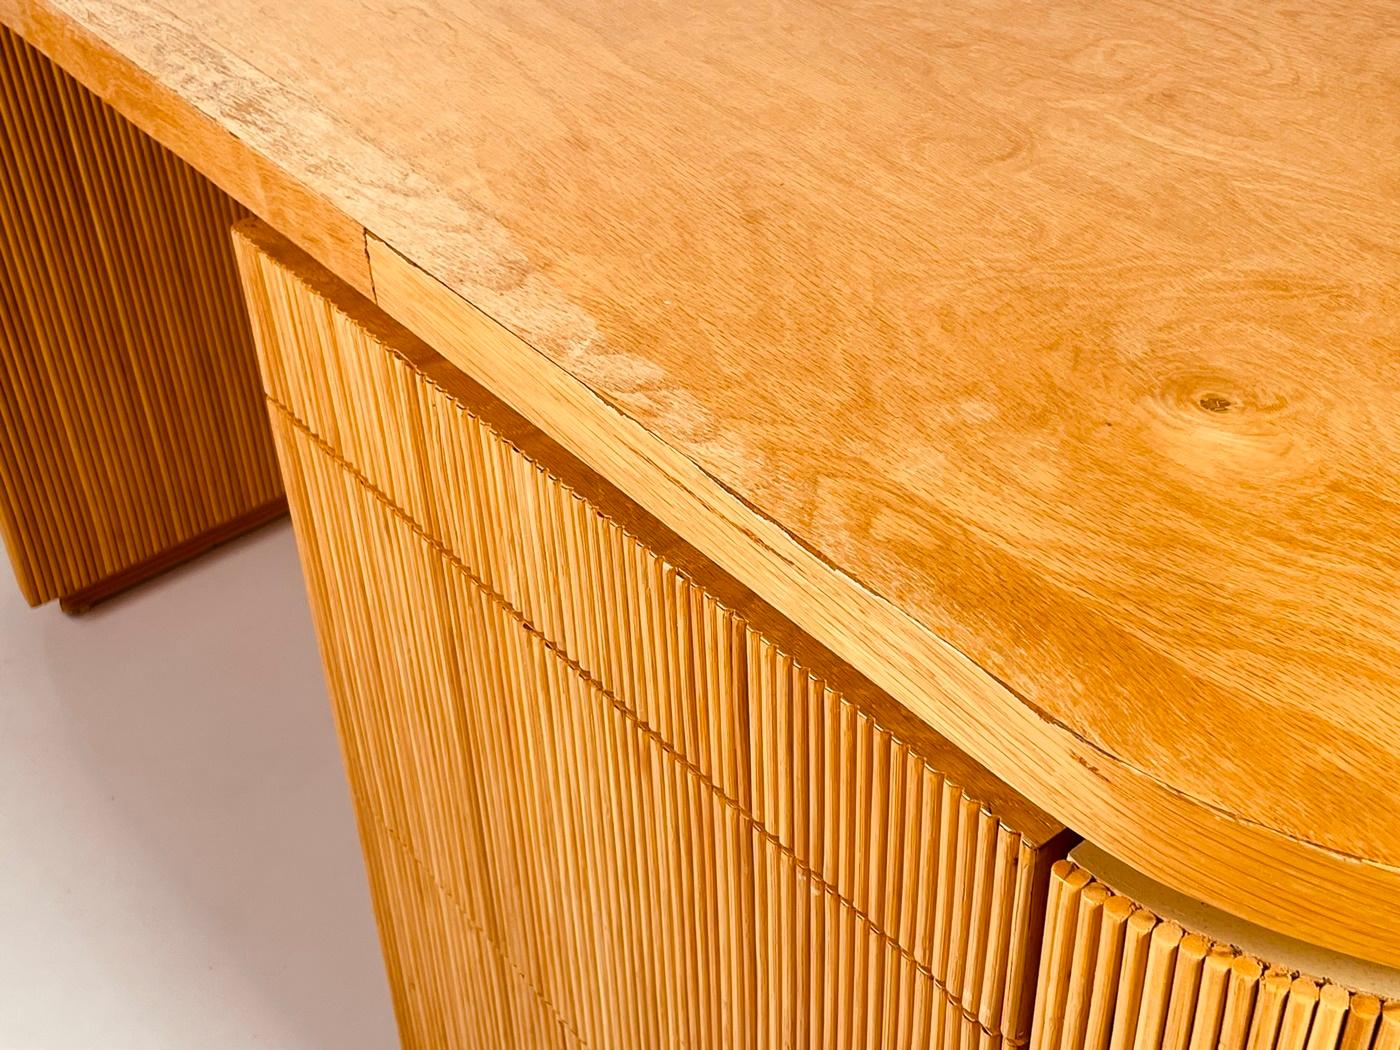 Pencil Reed Executive Desk in the Style of Karl Springer, USA 1970's For Sale 2